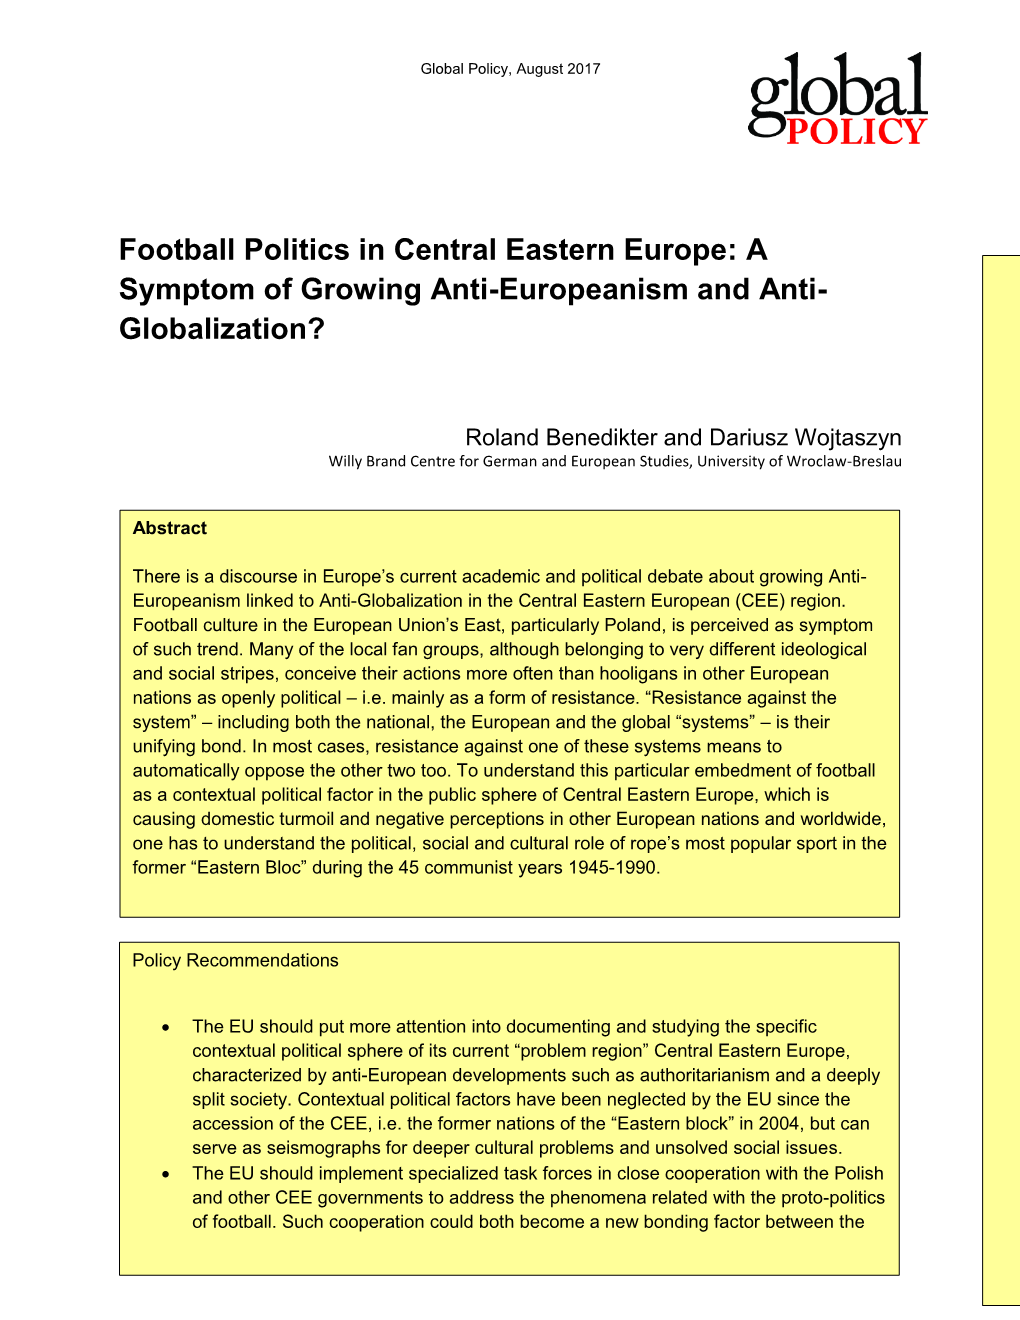 Football Politics in Central Eastern Europe: a Symptom of Growing Anti-Europeanism and Anti- Globalization?